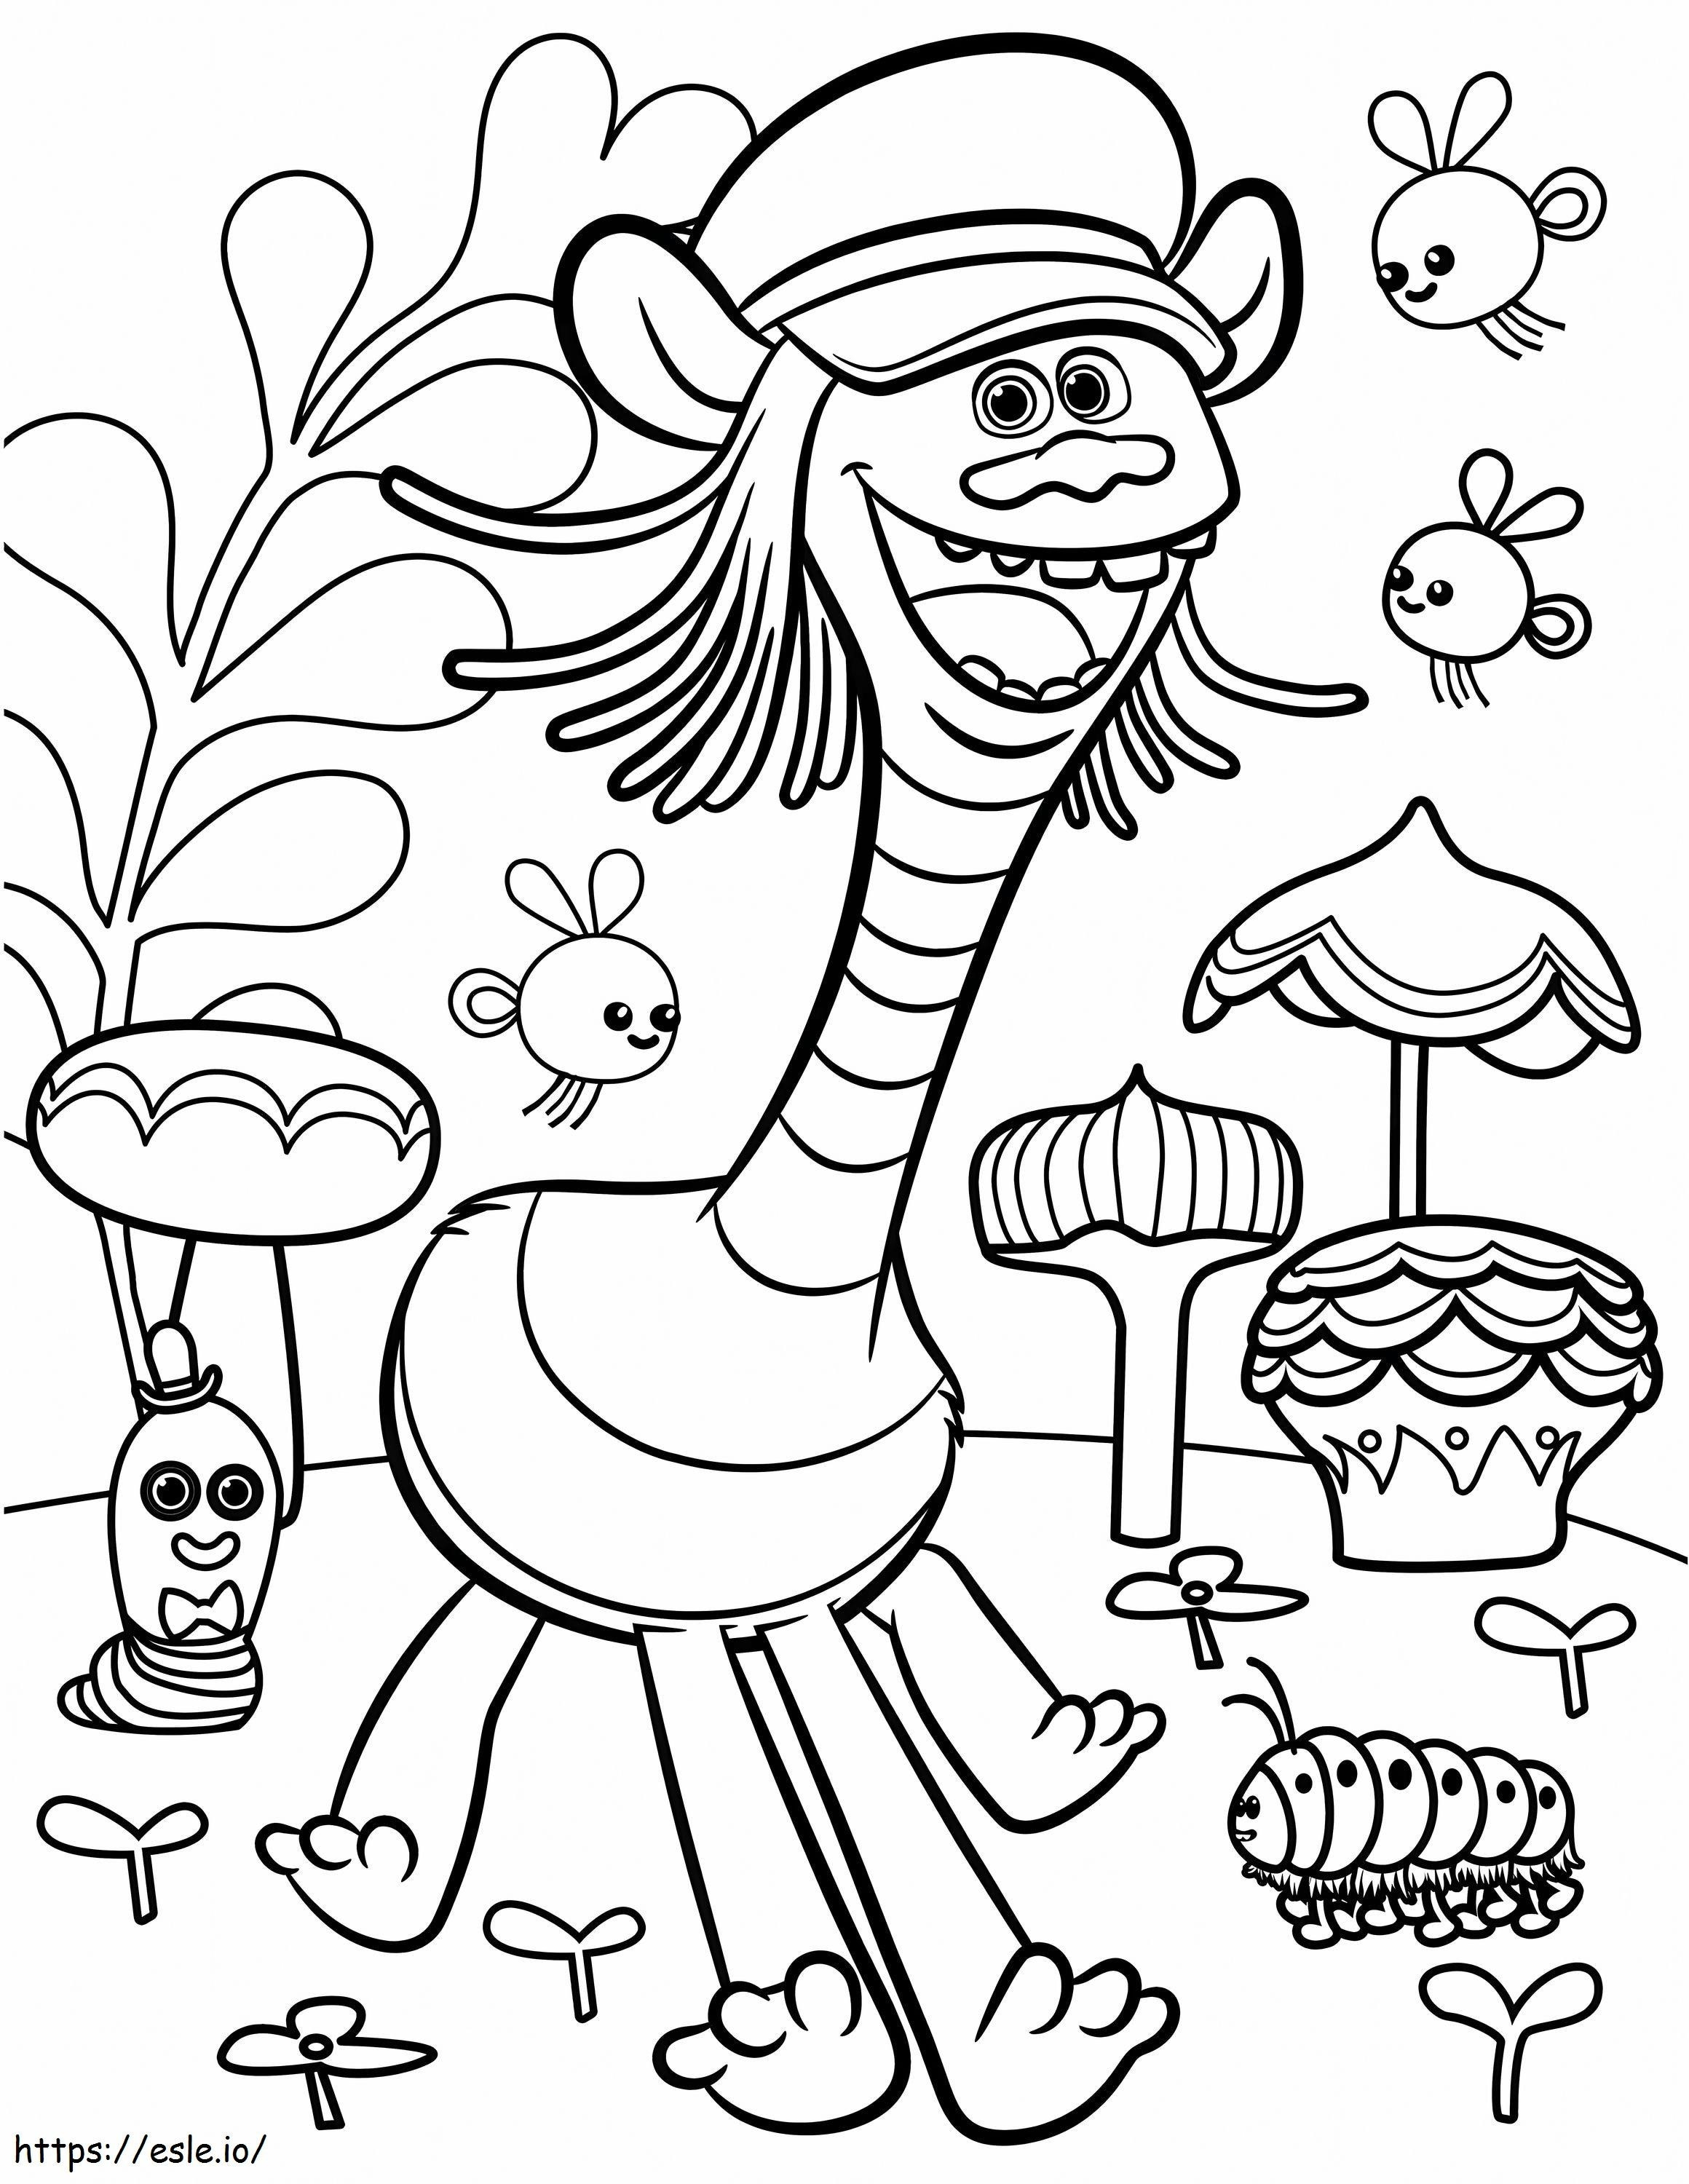 1531797231 Happy Cooper A4 coloring page